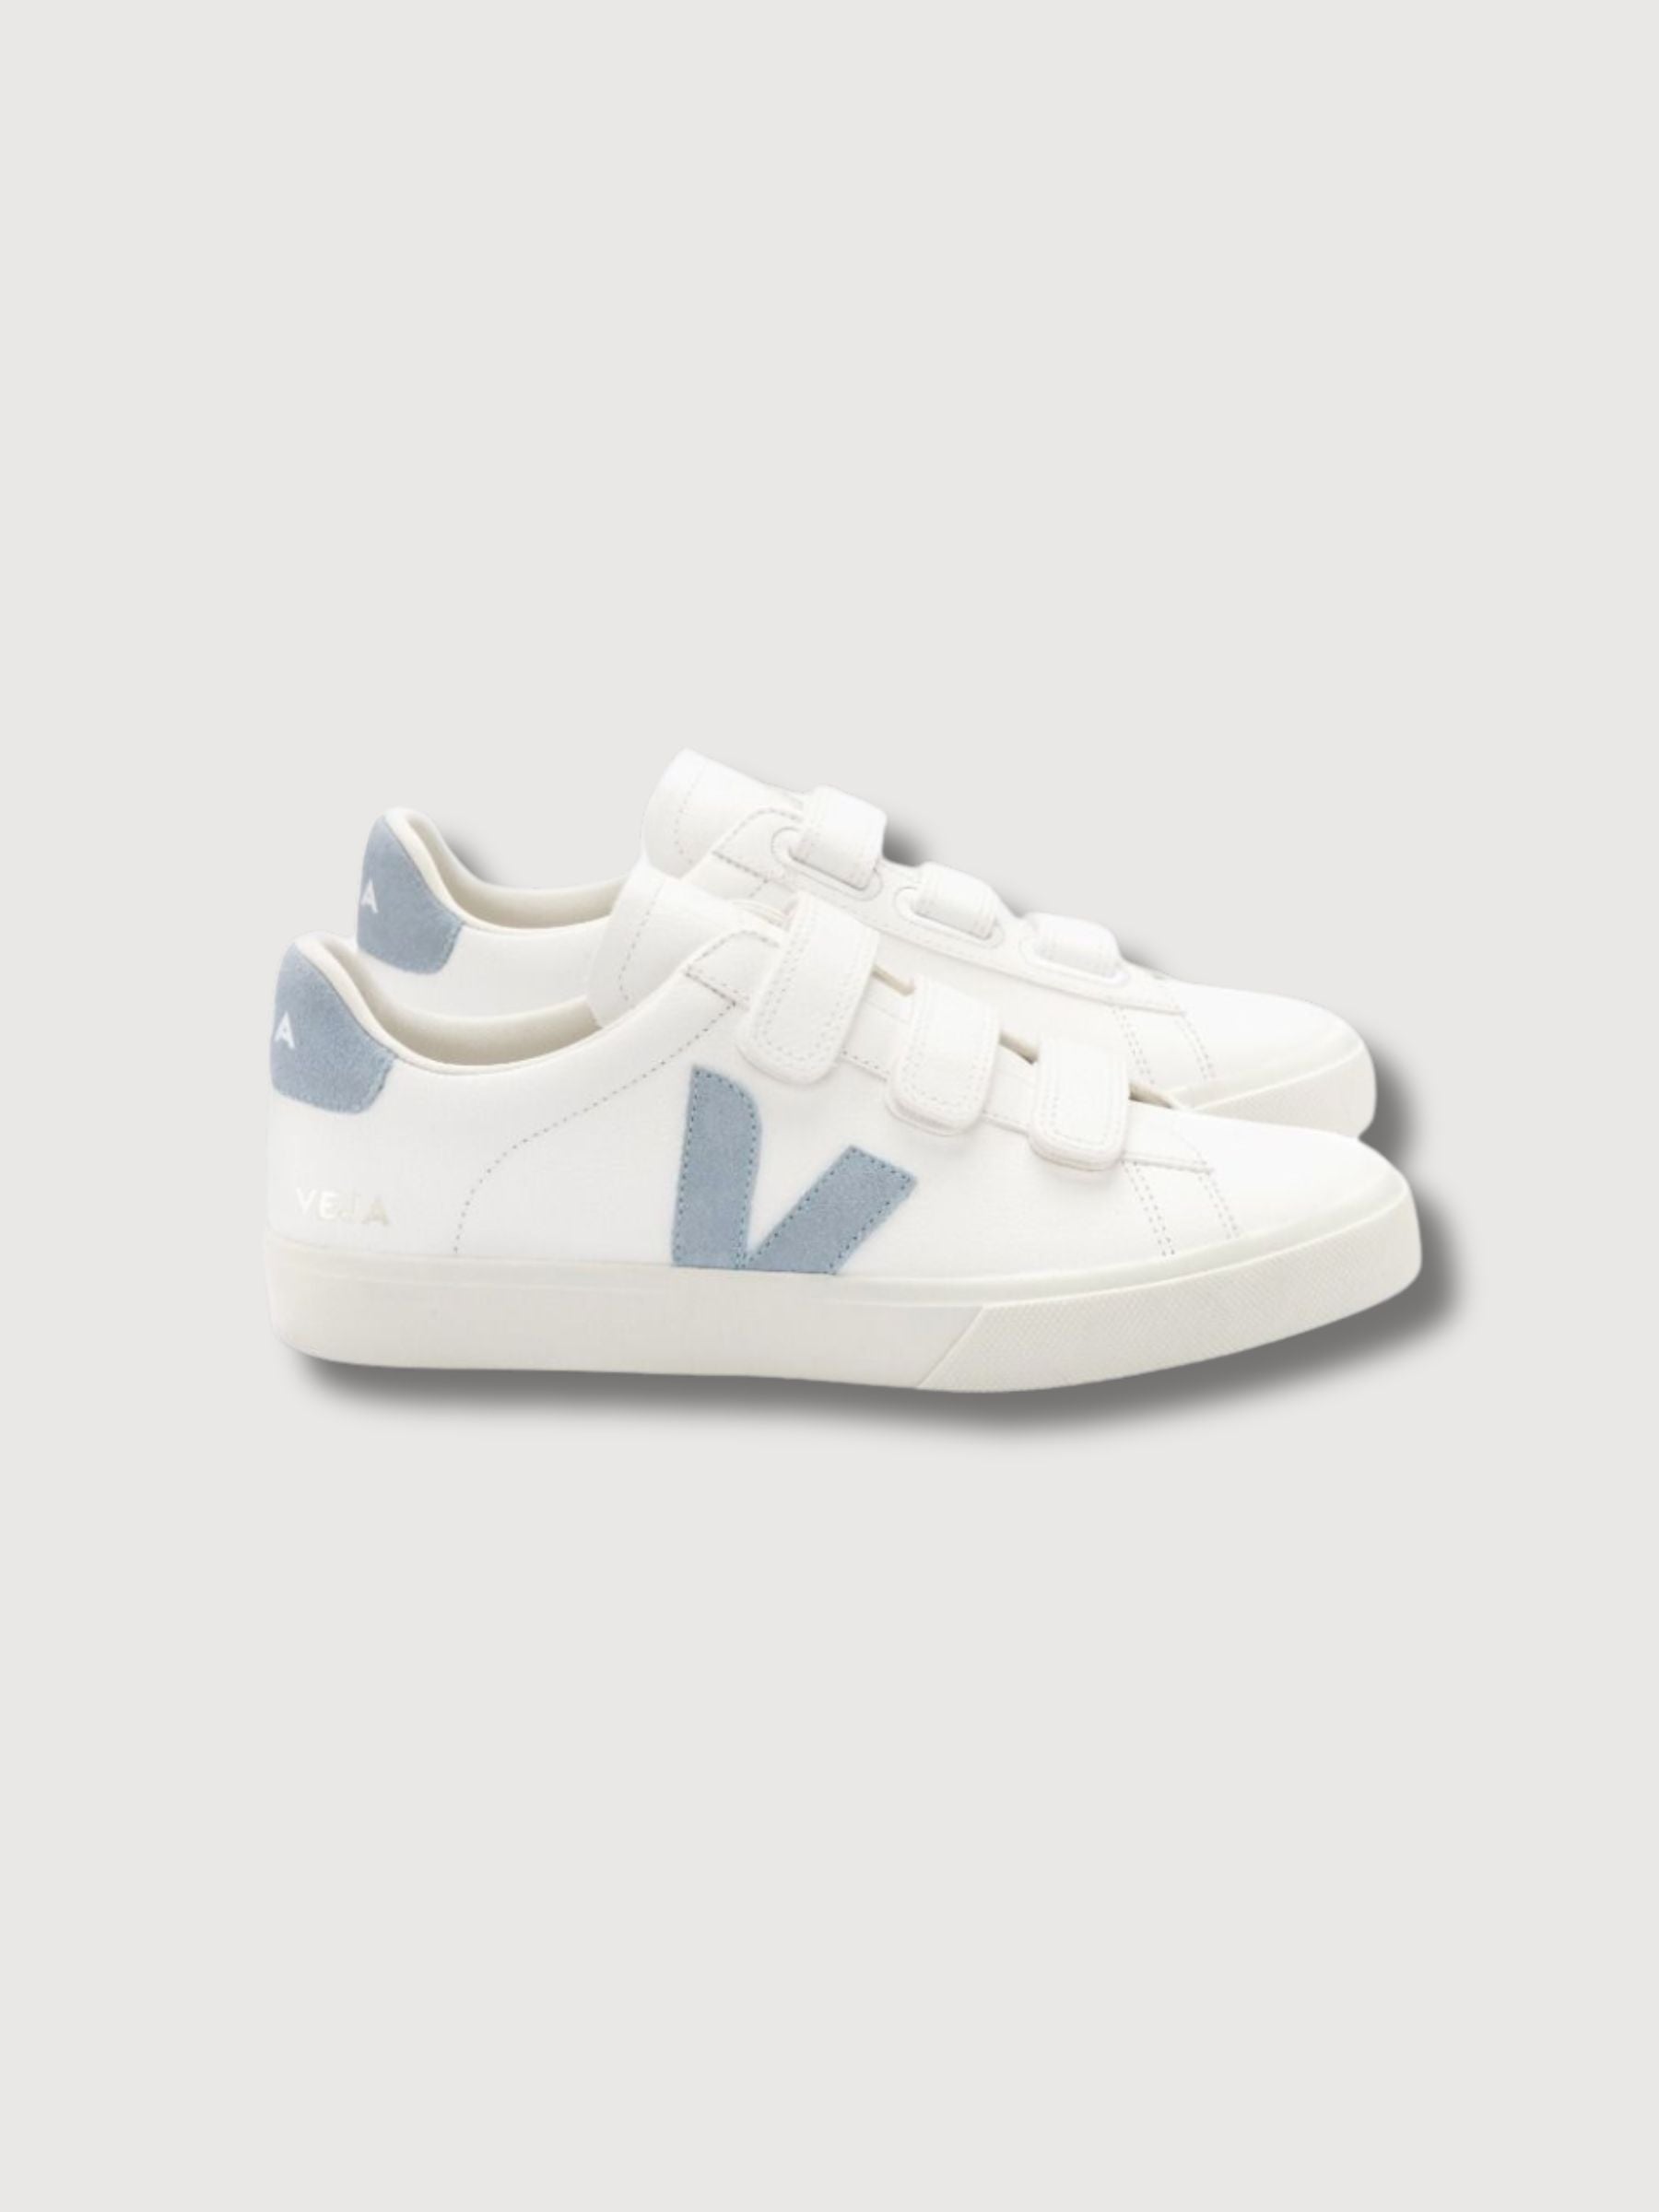 Sneakers 3 Strap Recife Extra White-Steel In Sustainable Leather | Veja